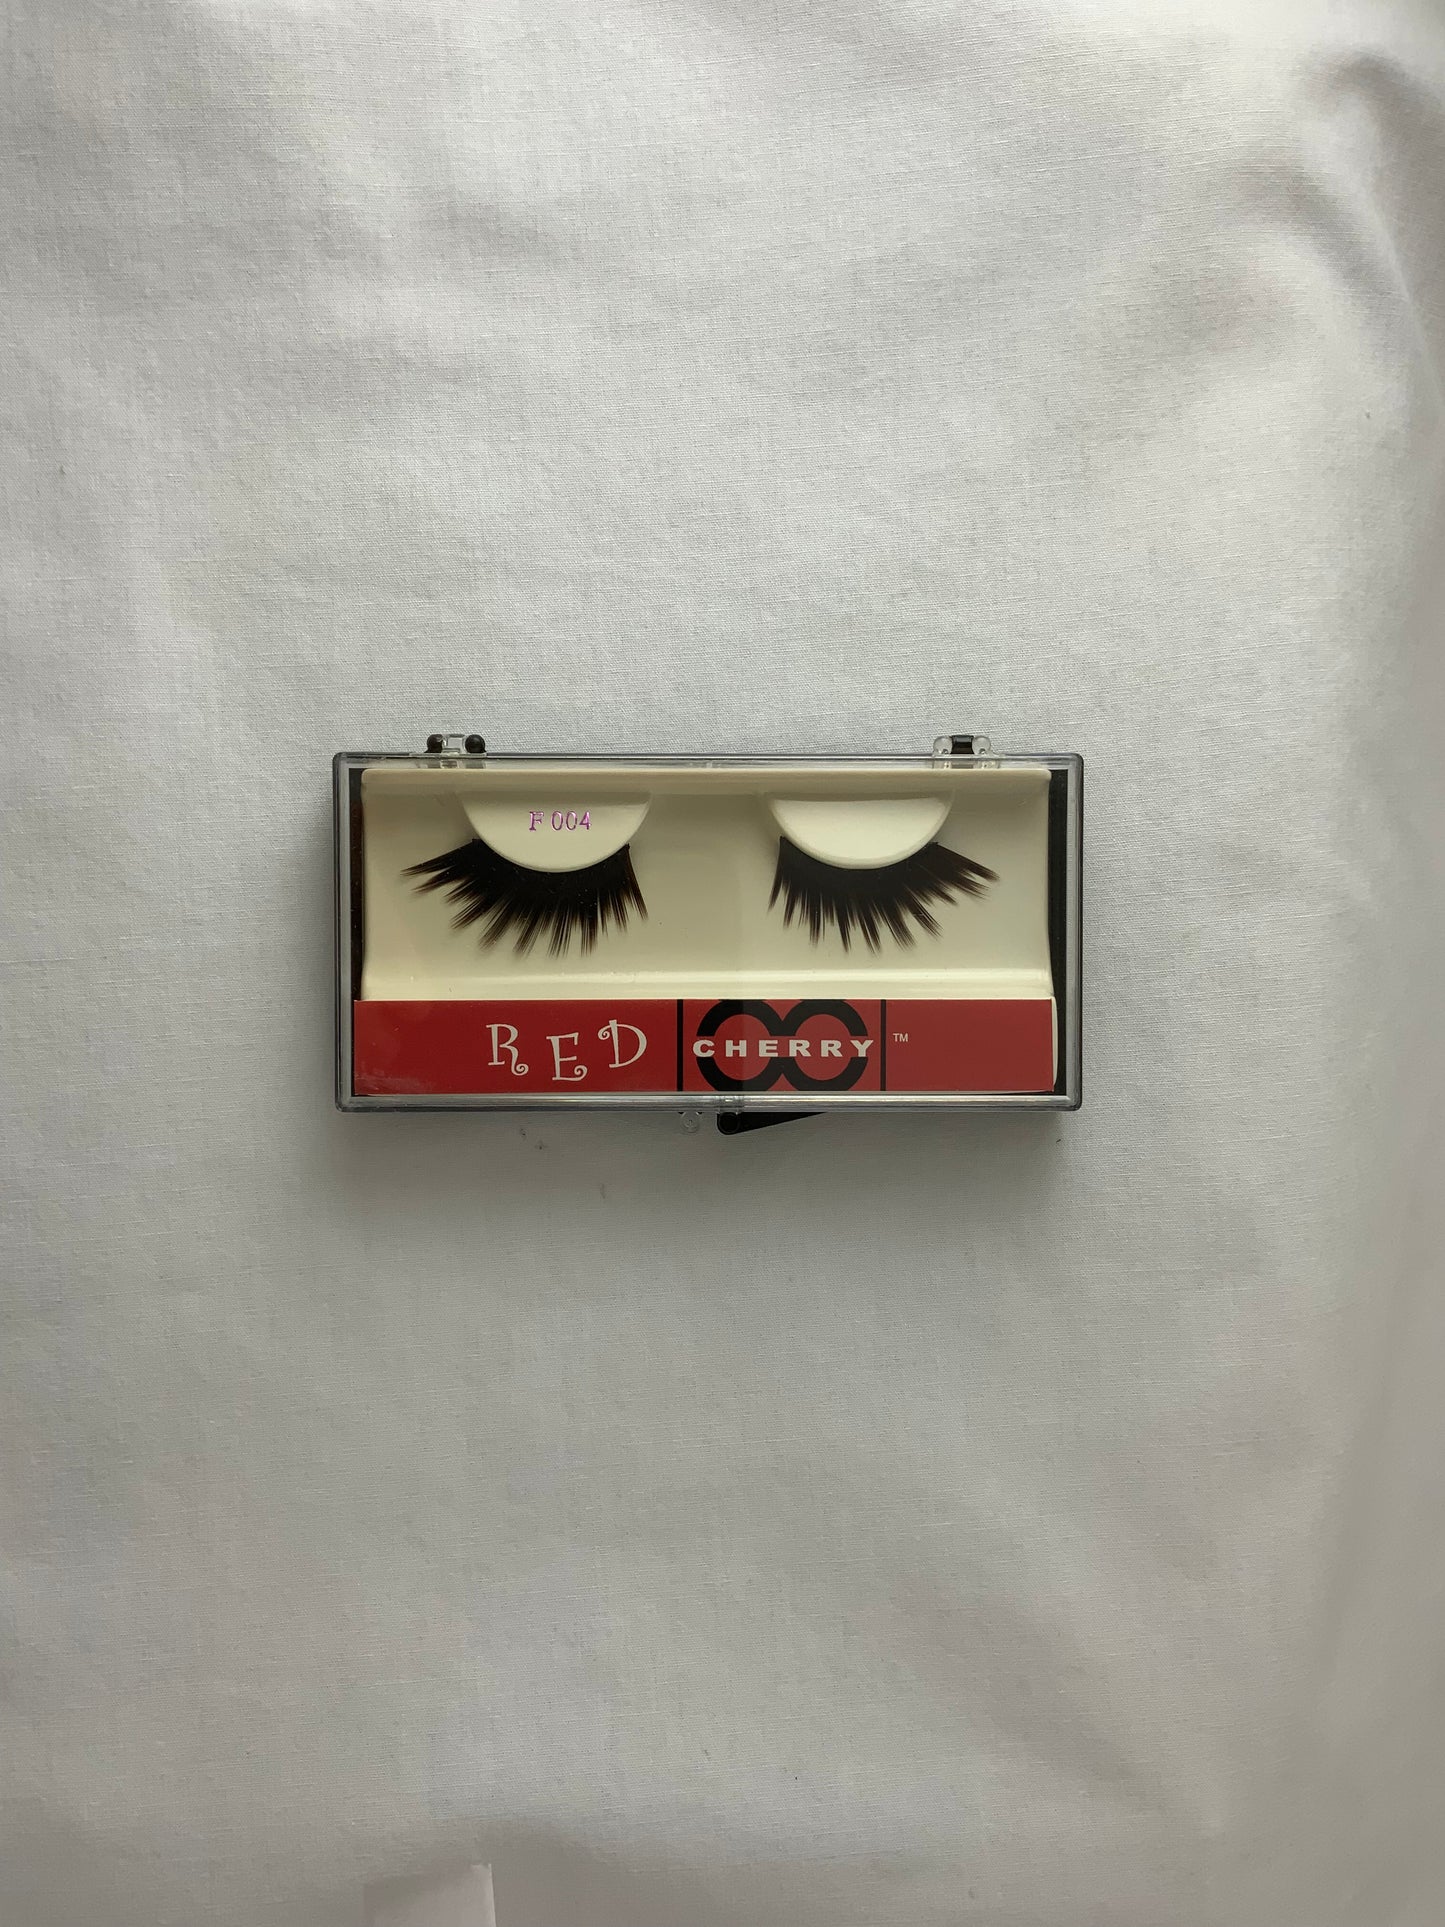 Red Cherry Lashes FOX FAUX FUR BROWN (RED-F004)